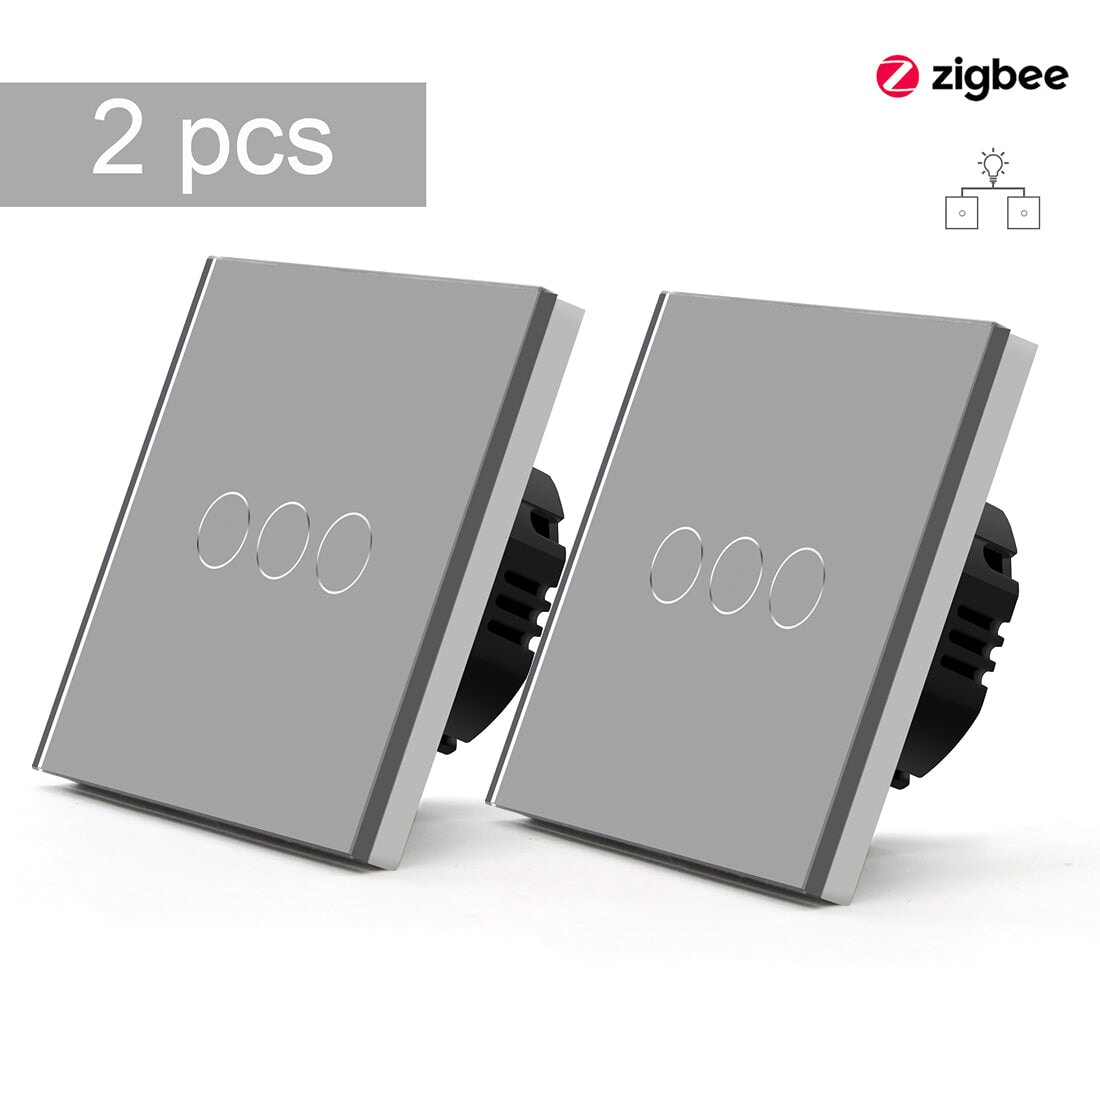 BSEED Zigbee Single Live Line Switch 1/2/3 Gang 1/2/3 Way Wall Smart Light Switch Single Live Line 1/2/3 pack Light Switches Bseedswitch Grey 3Gang 2 Pcs/Pack